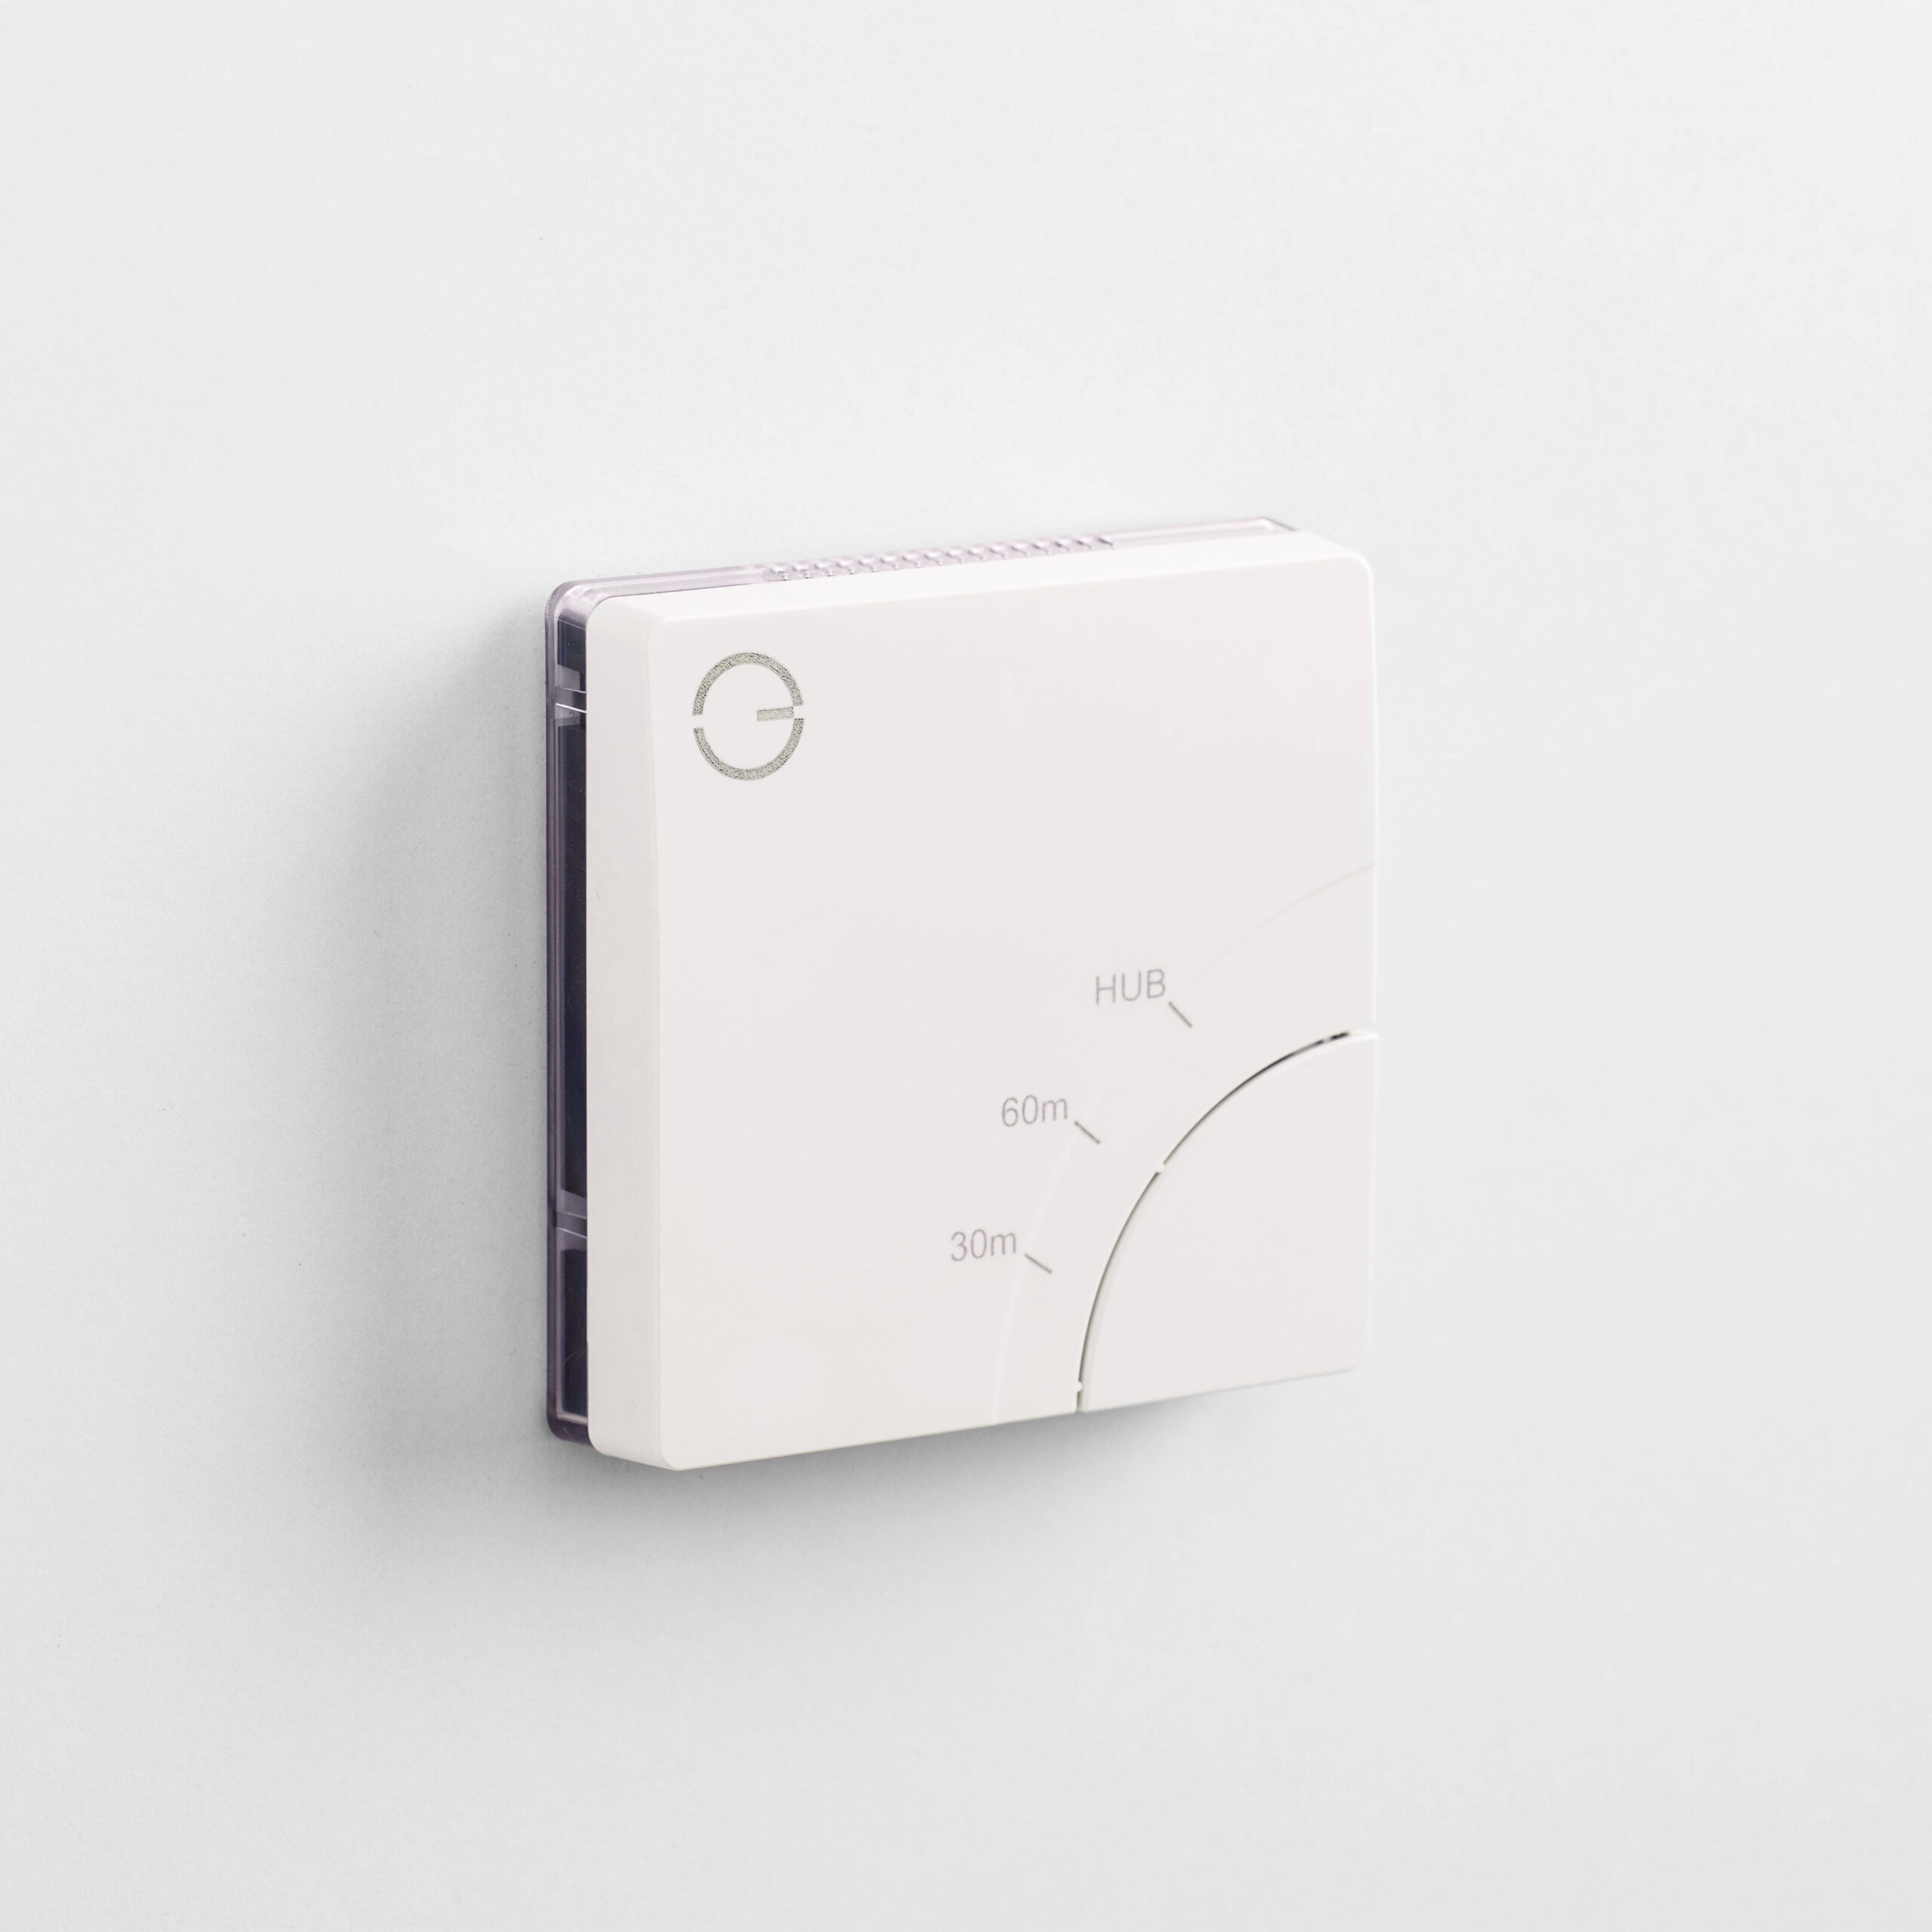 Genius electric Switch for infrared heating